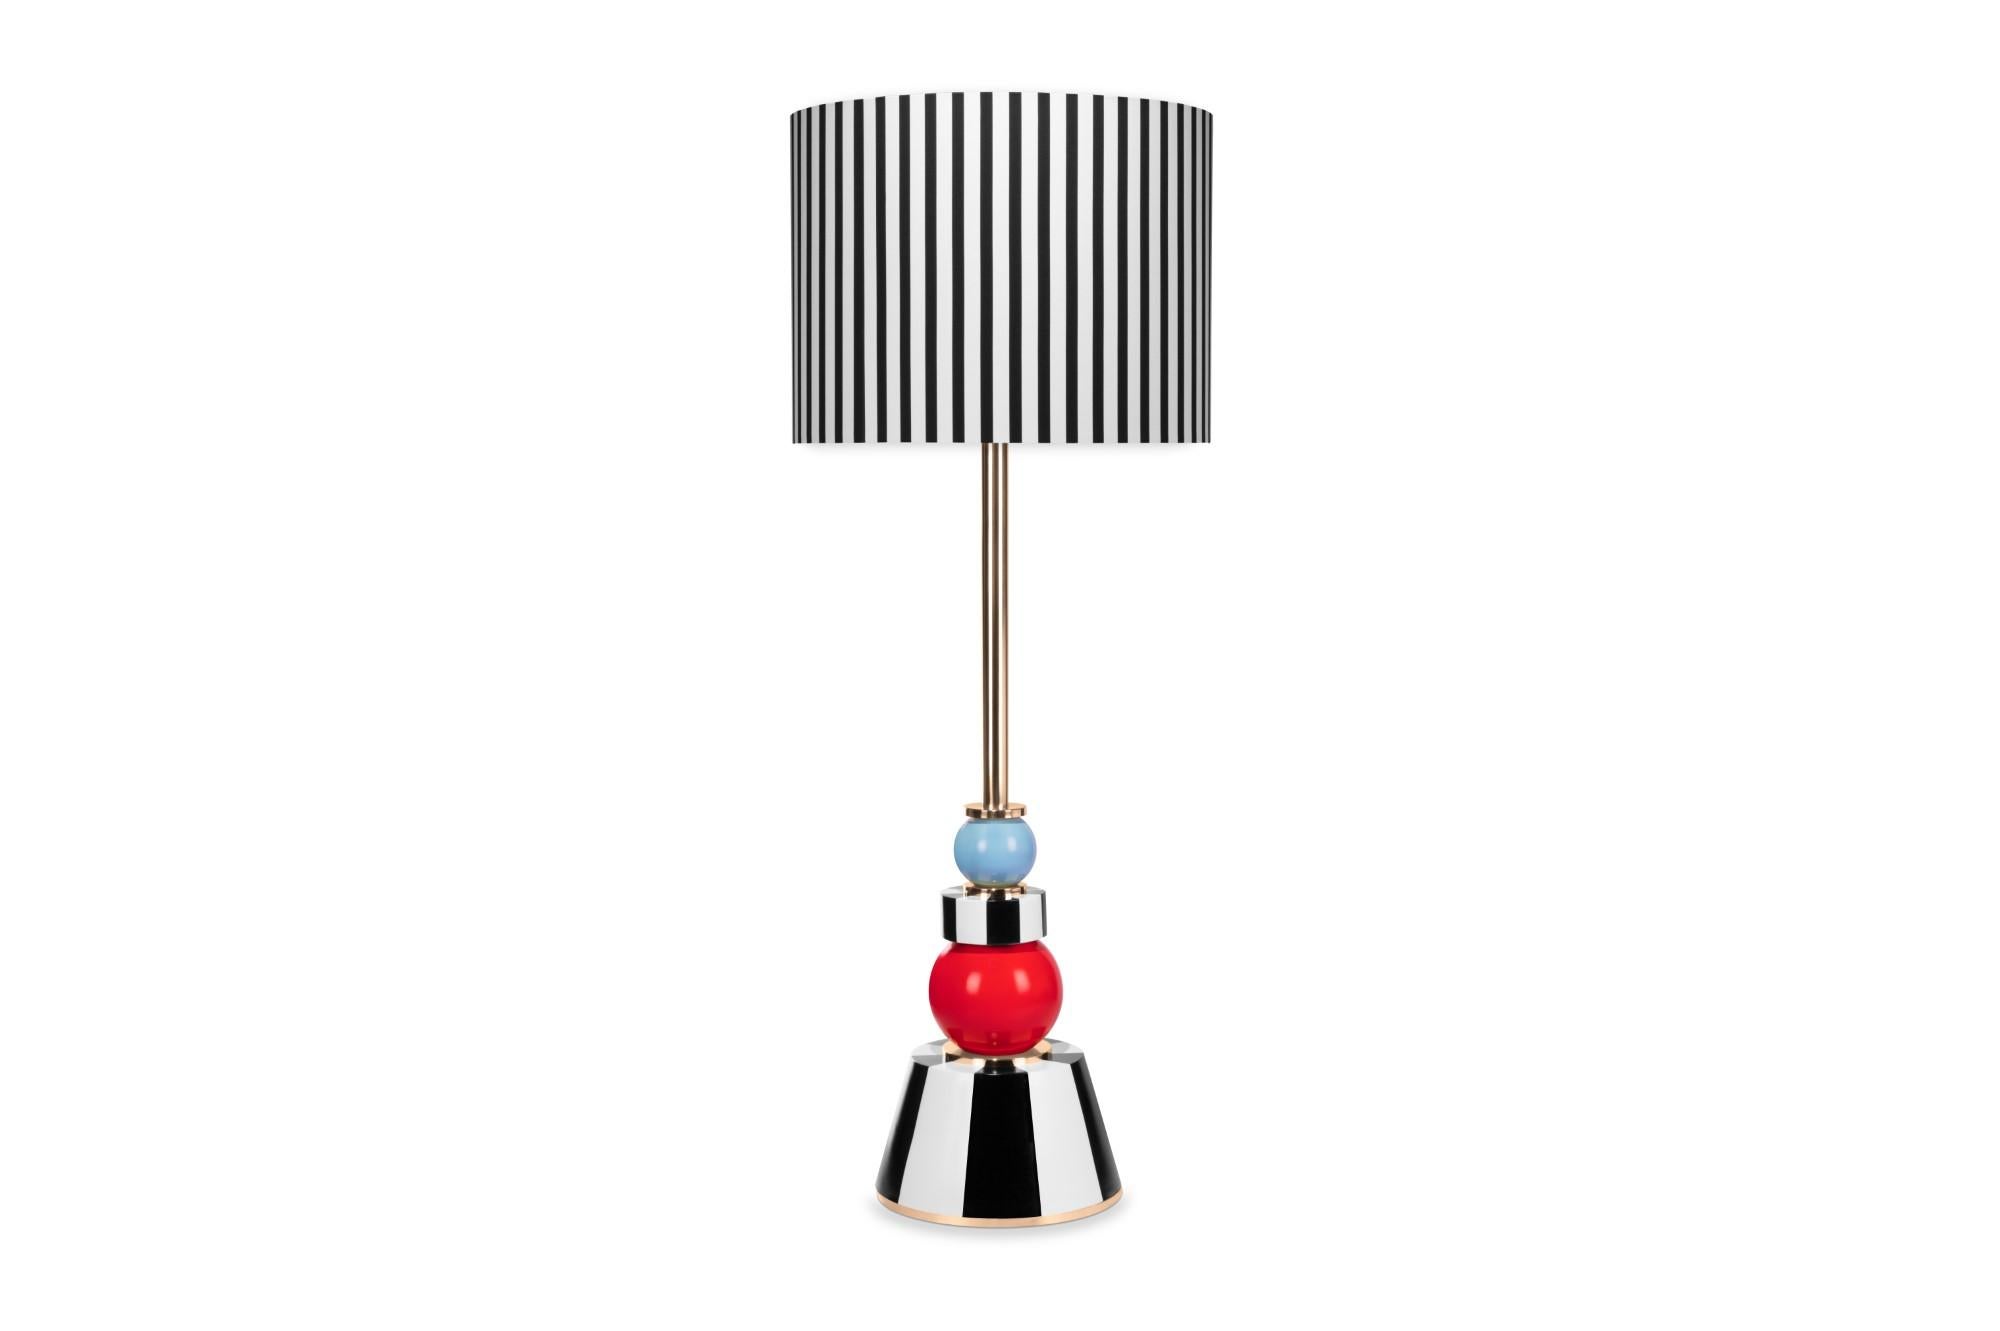 Valentina floor lamp, Royal Stranger
Dimensions:
Width 75cm, height 207cm, depth 75cm

Inspired by the femininity and using bold and vibrant color schemes, this collection is meant to be positive and happy, celebrating the inner beauty, elegance and